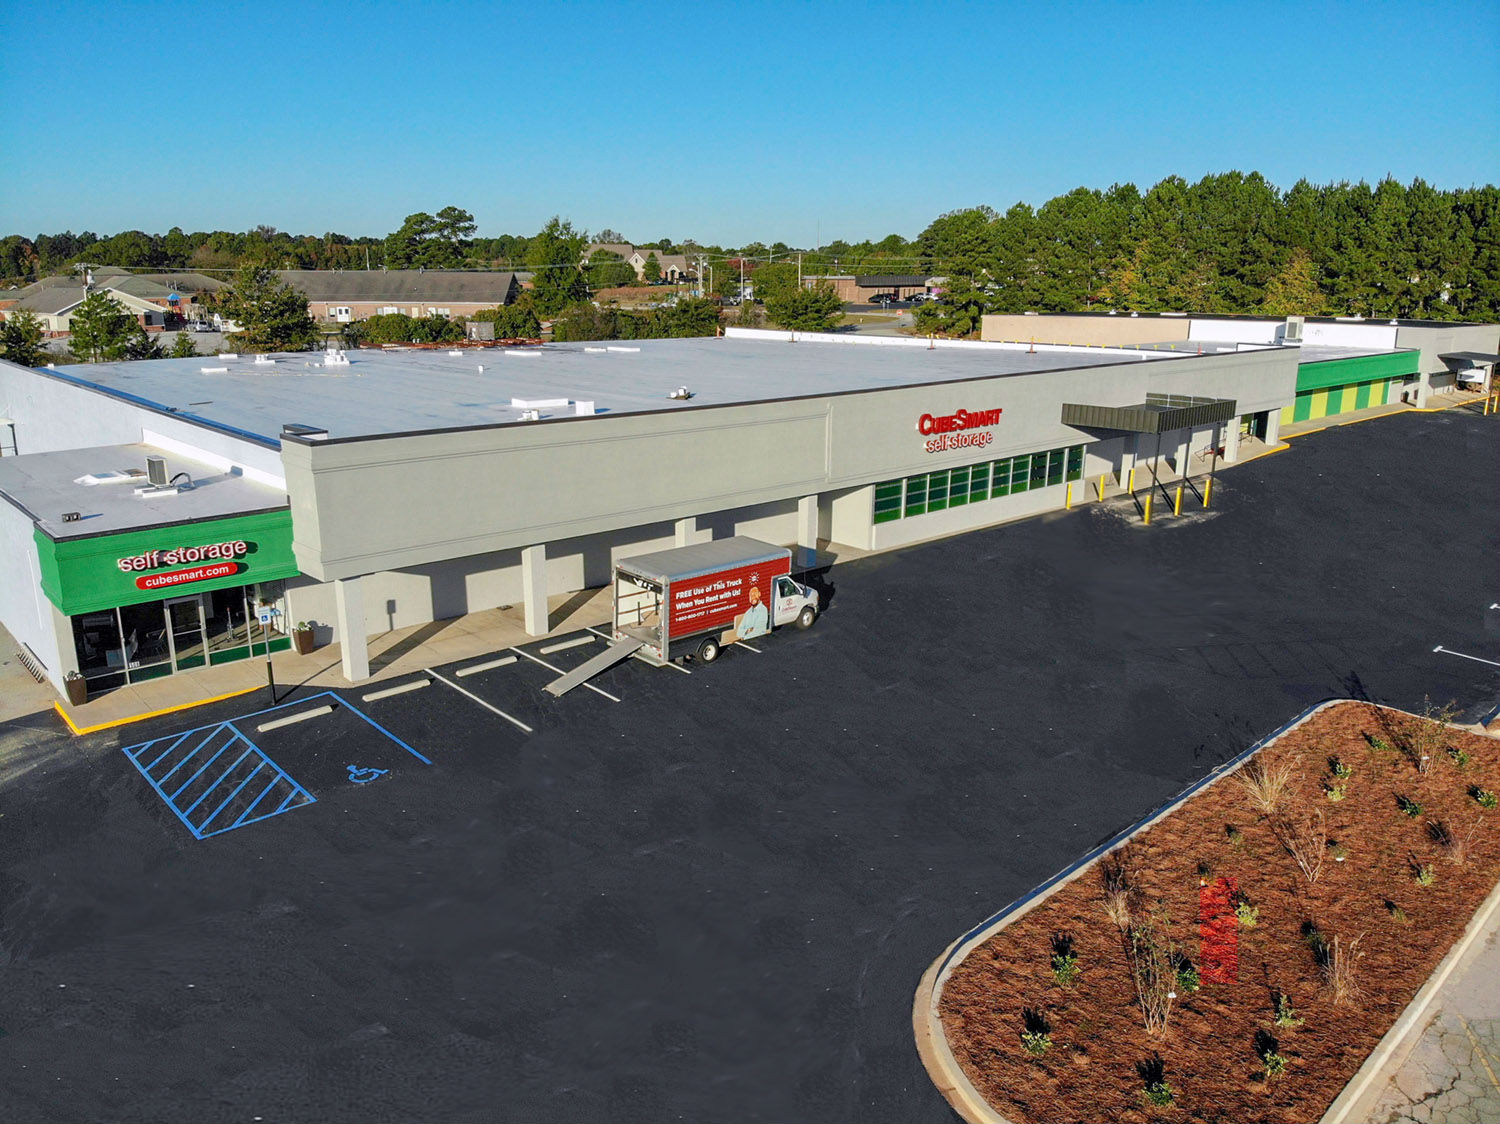 CubeSmart in Greenwood features 300 storage units ranging from 25 to 300 square feet. (Photo/Provided)